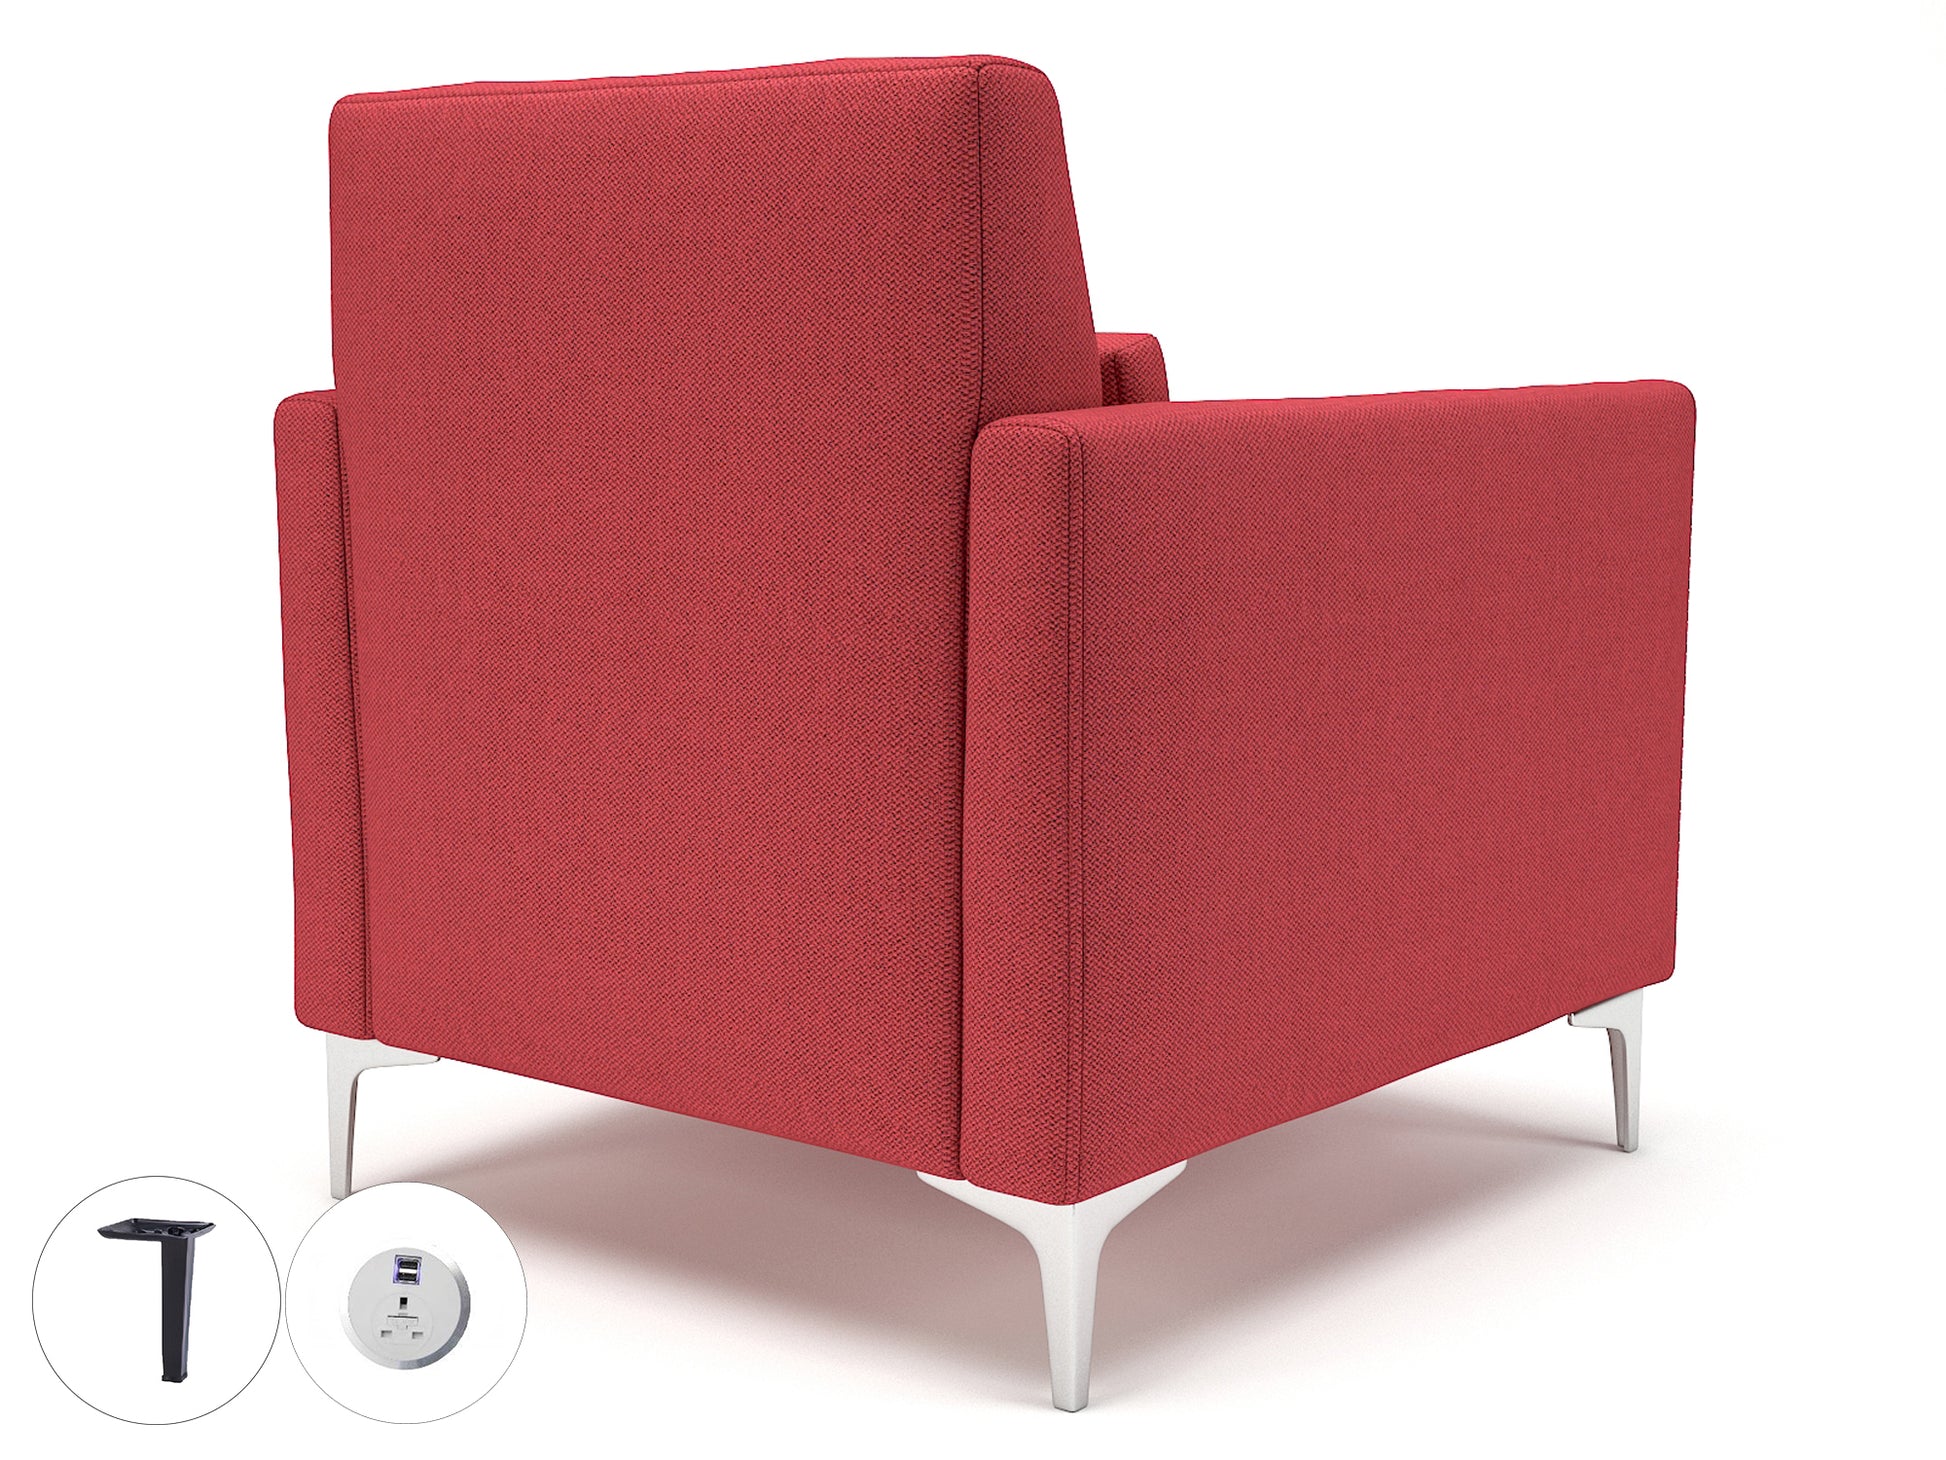 Roselle 90cm Wide Armchair in Camira Era Fabric with Socket